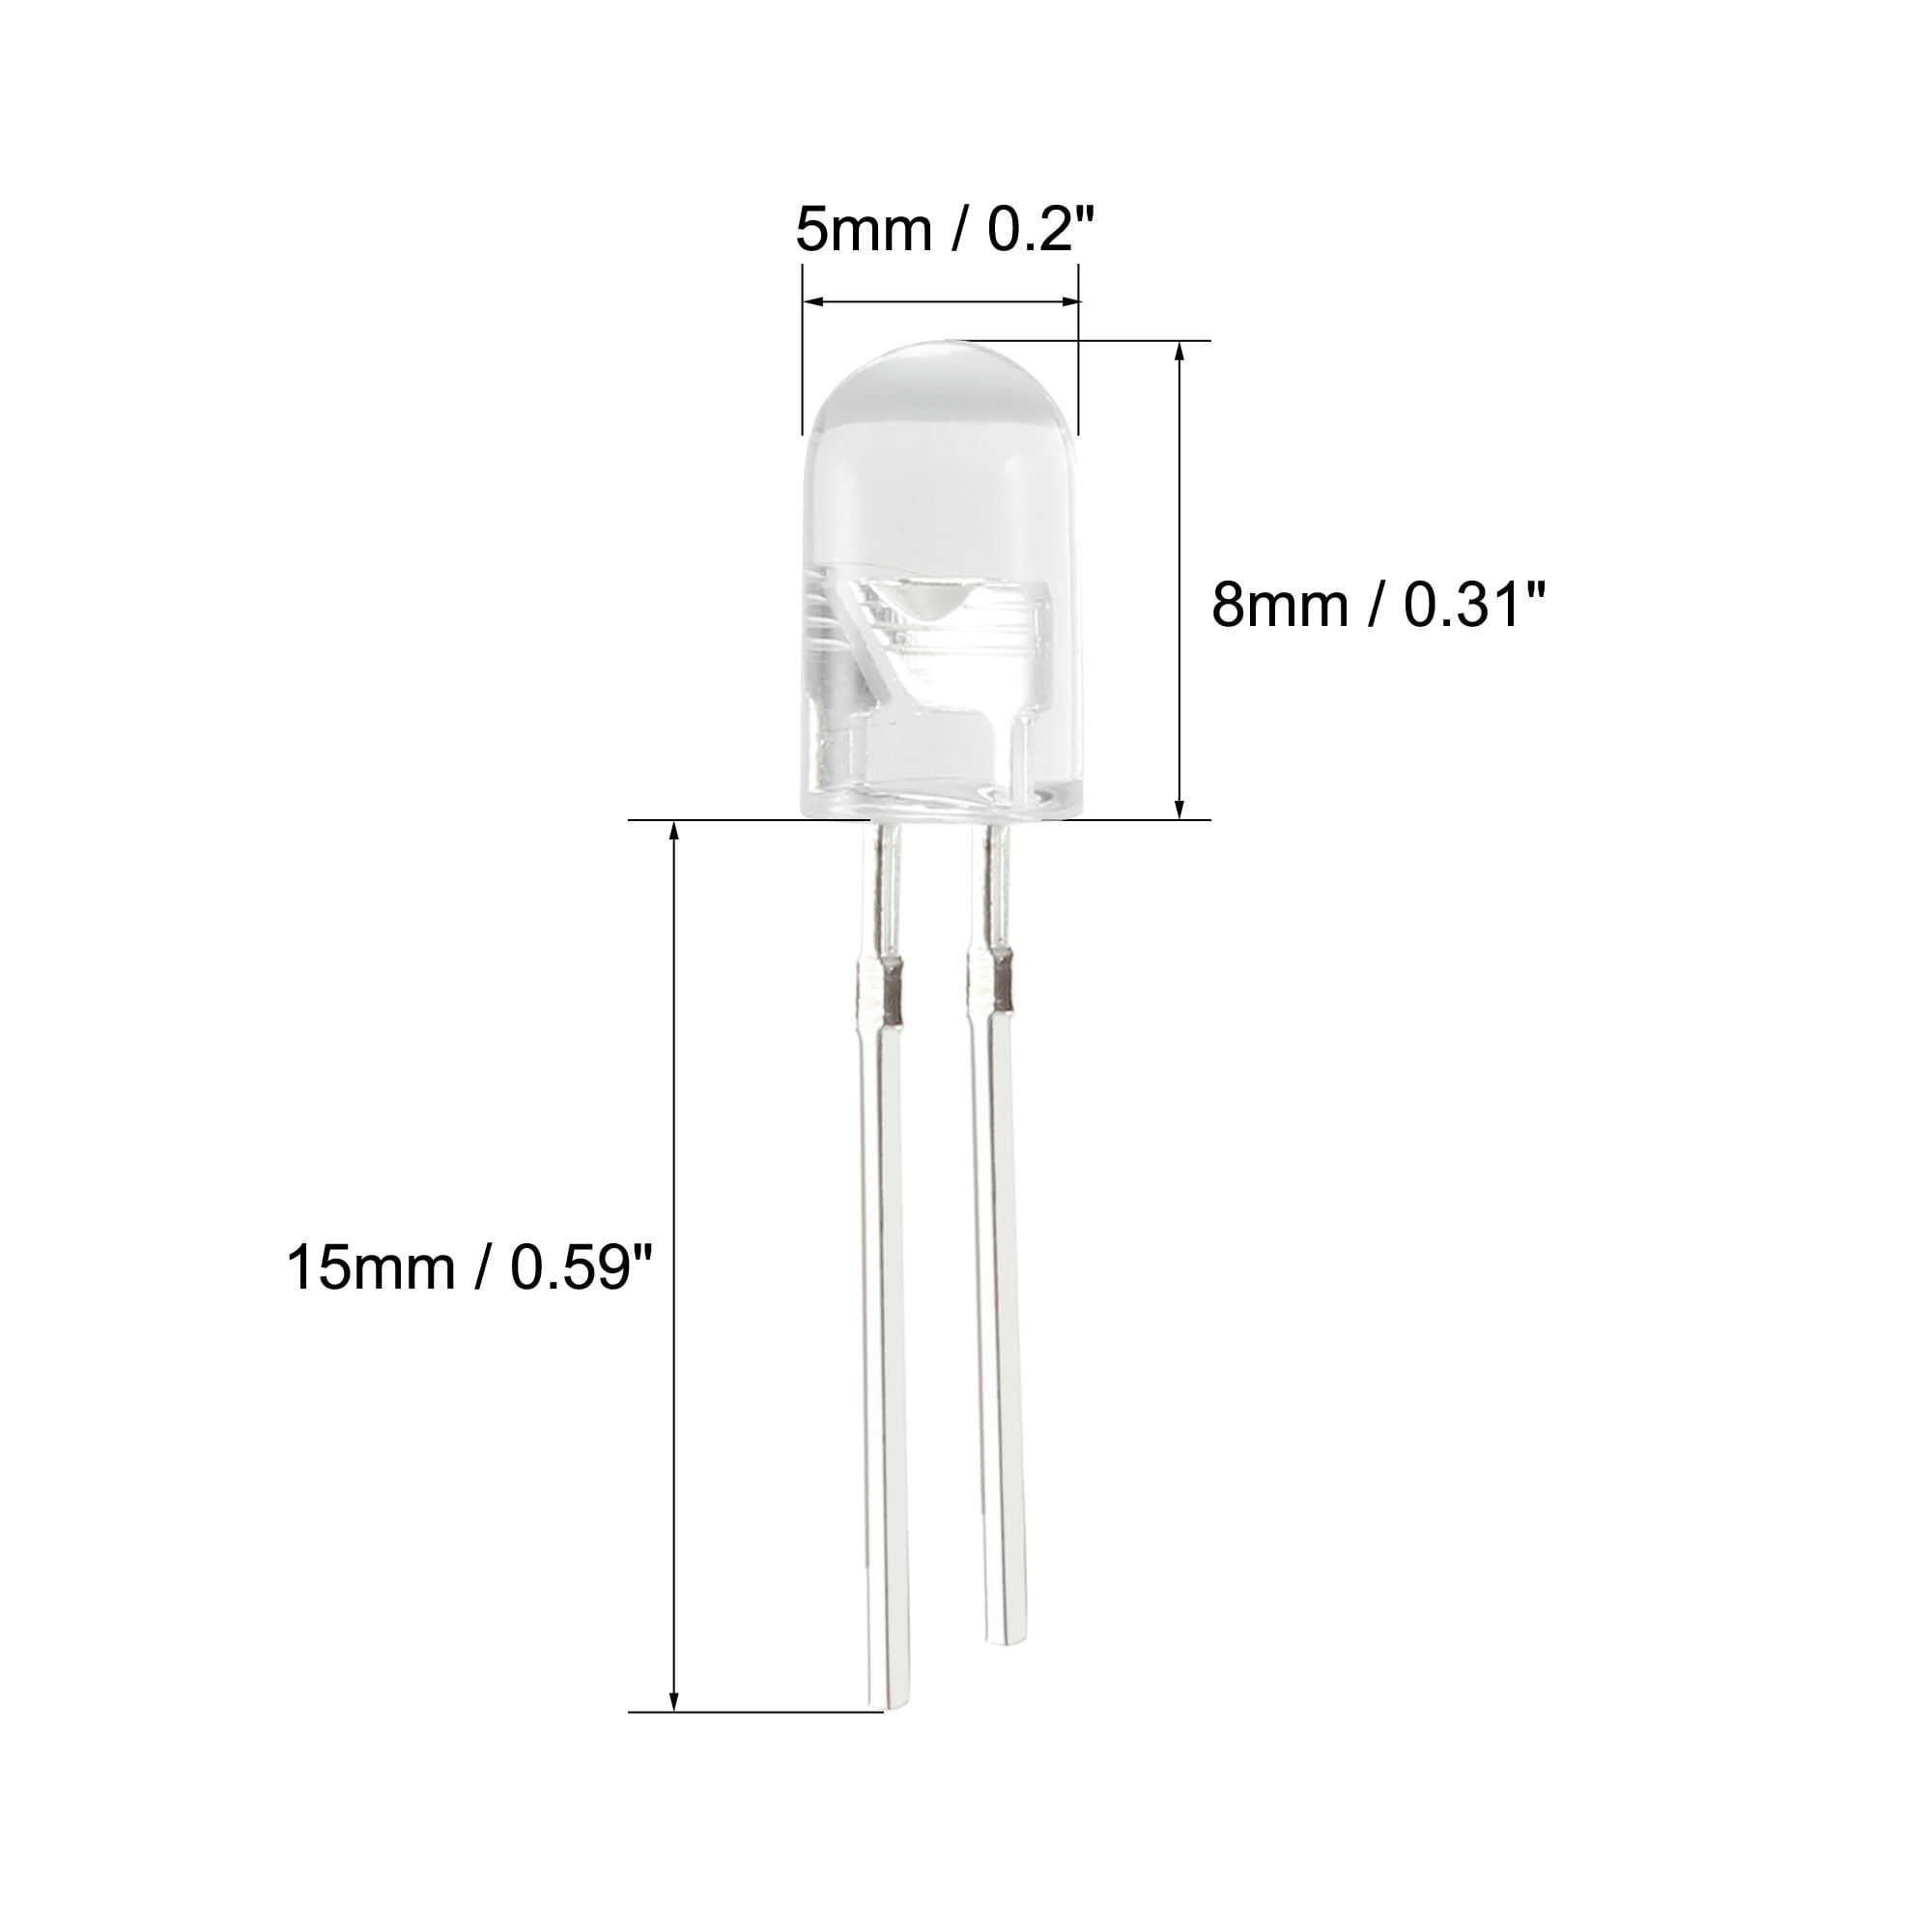 20pcs 5mm 940nm Infrared Emitting diode DC 1.5V LED IR emitter Clear Light Emitting diodes Round Head for Arduino 